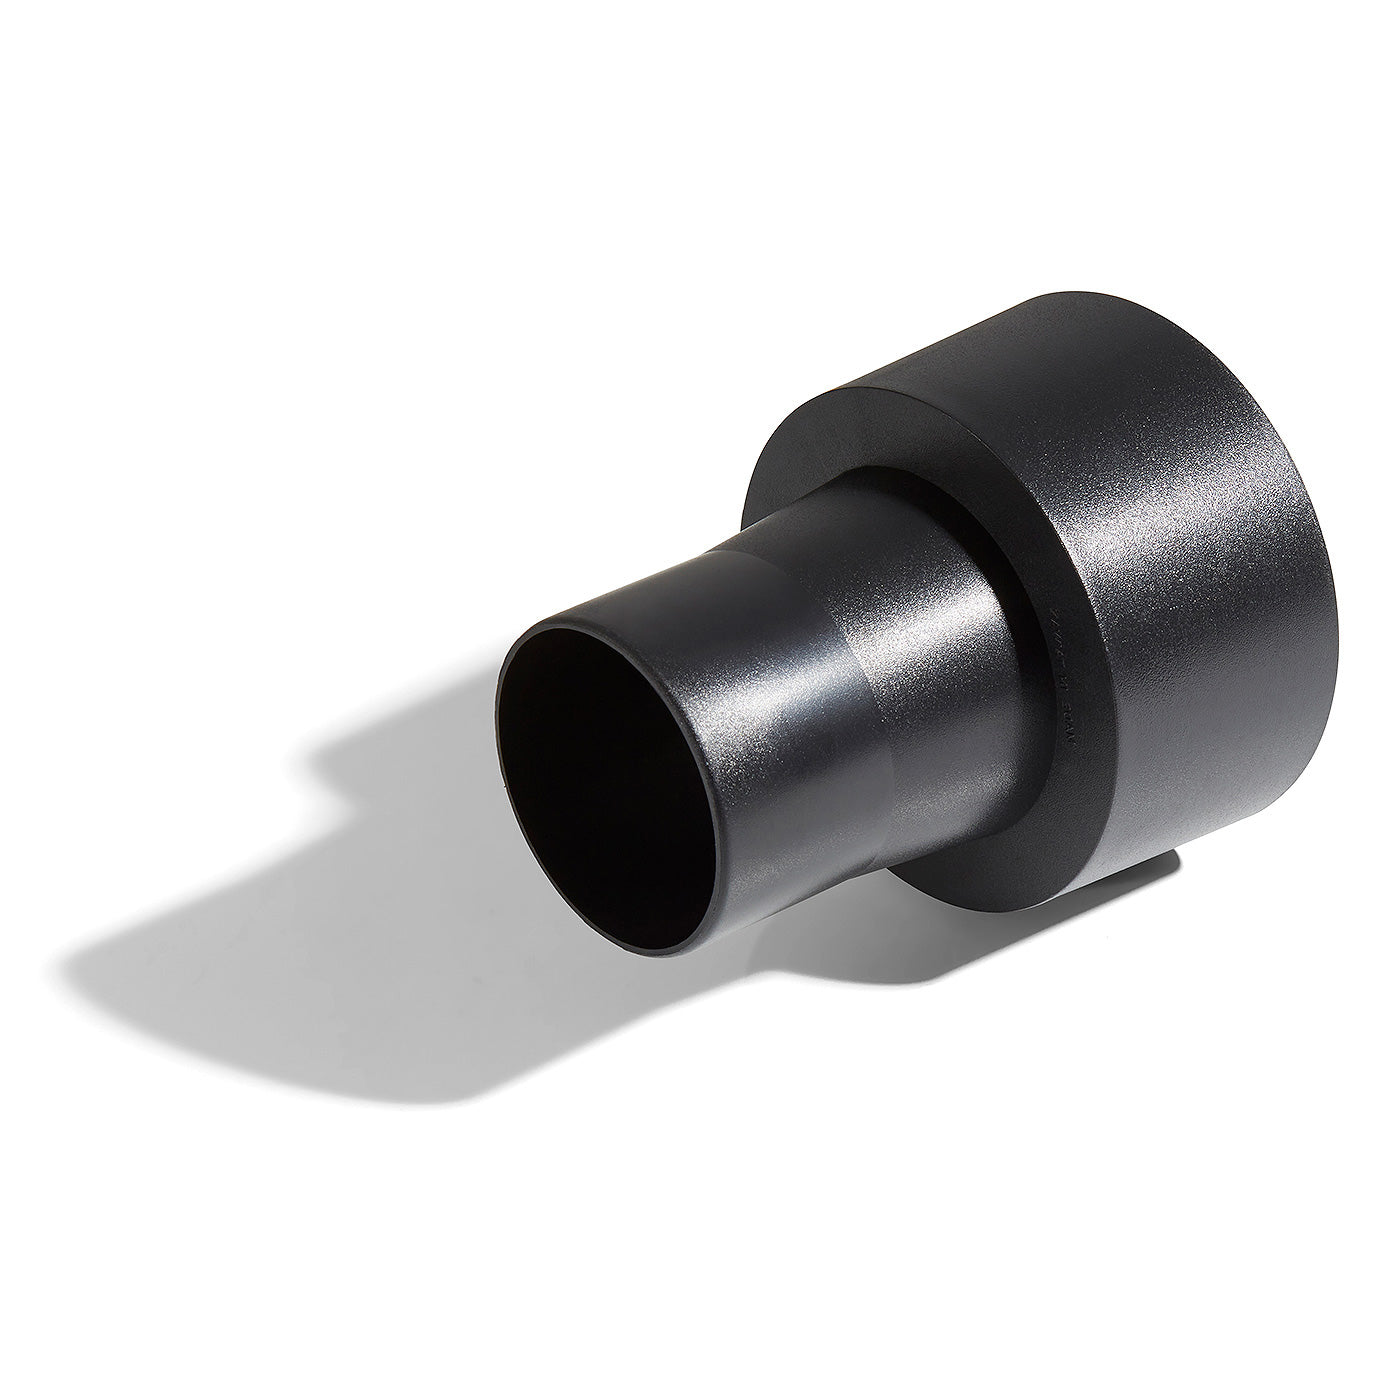 Dust Hose Threaded Tool Port - 100mm to 63mm